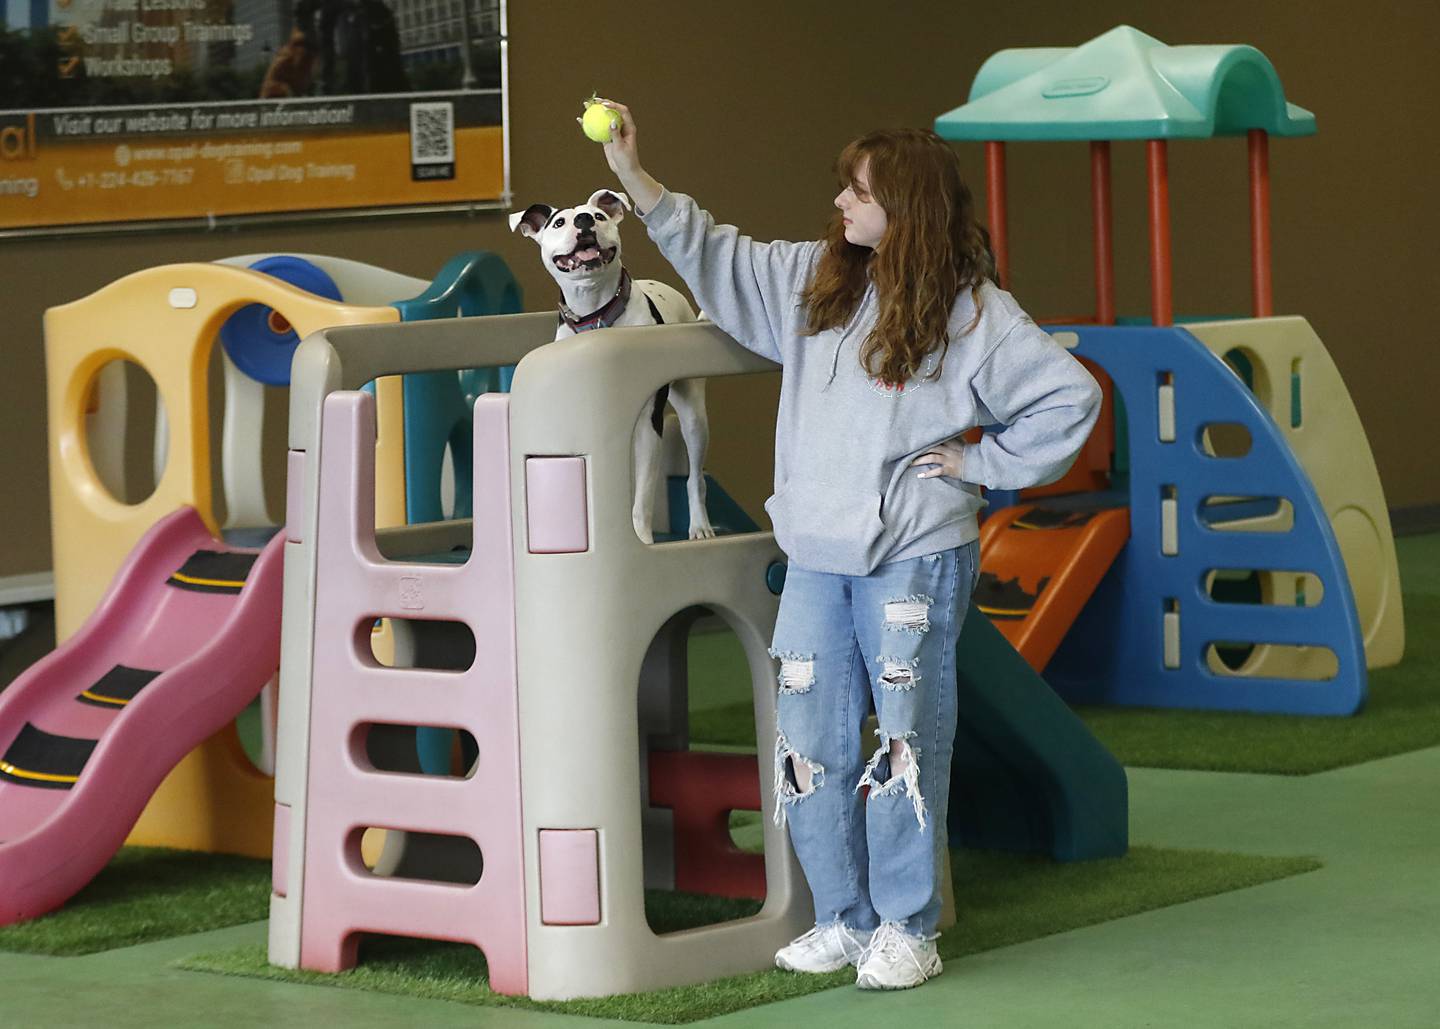 Mya Mayberry, a dog park attendant at Woof & Run, plays with Clarabelle Tuesday, April 25, 2023, at the indoor dog park and dog day care in McHenry. Woof & Run is re-opening after being closed for two weeks because of a staffing shortage.